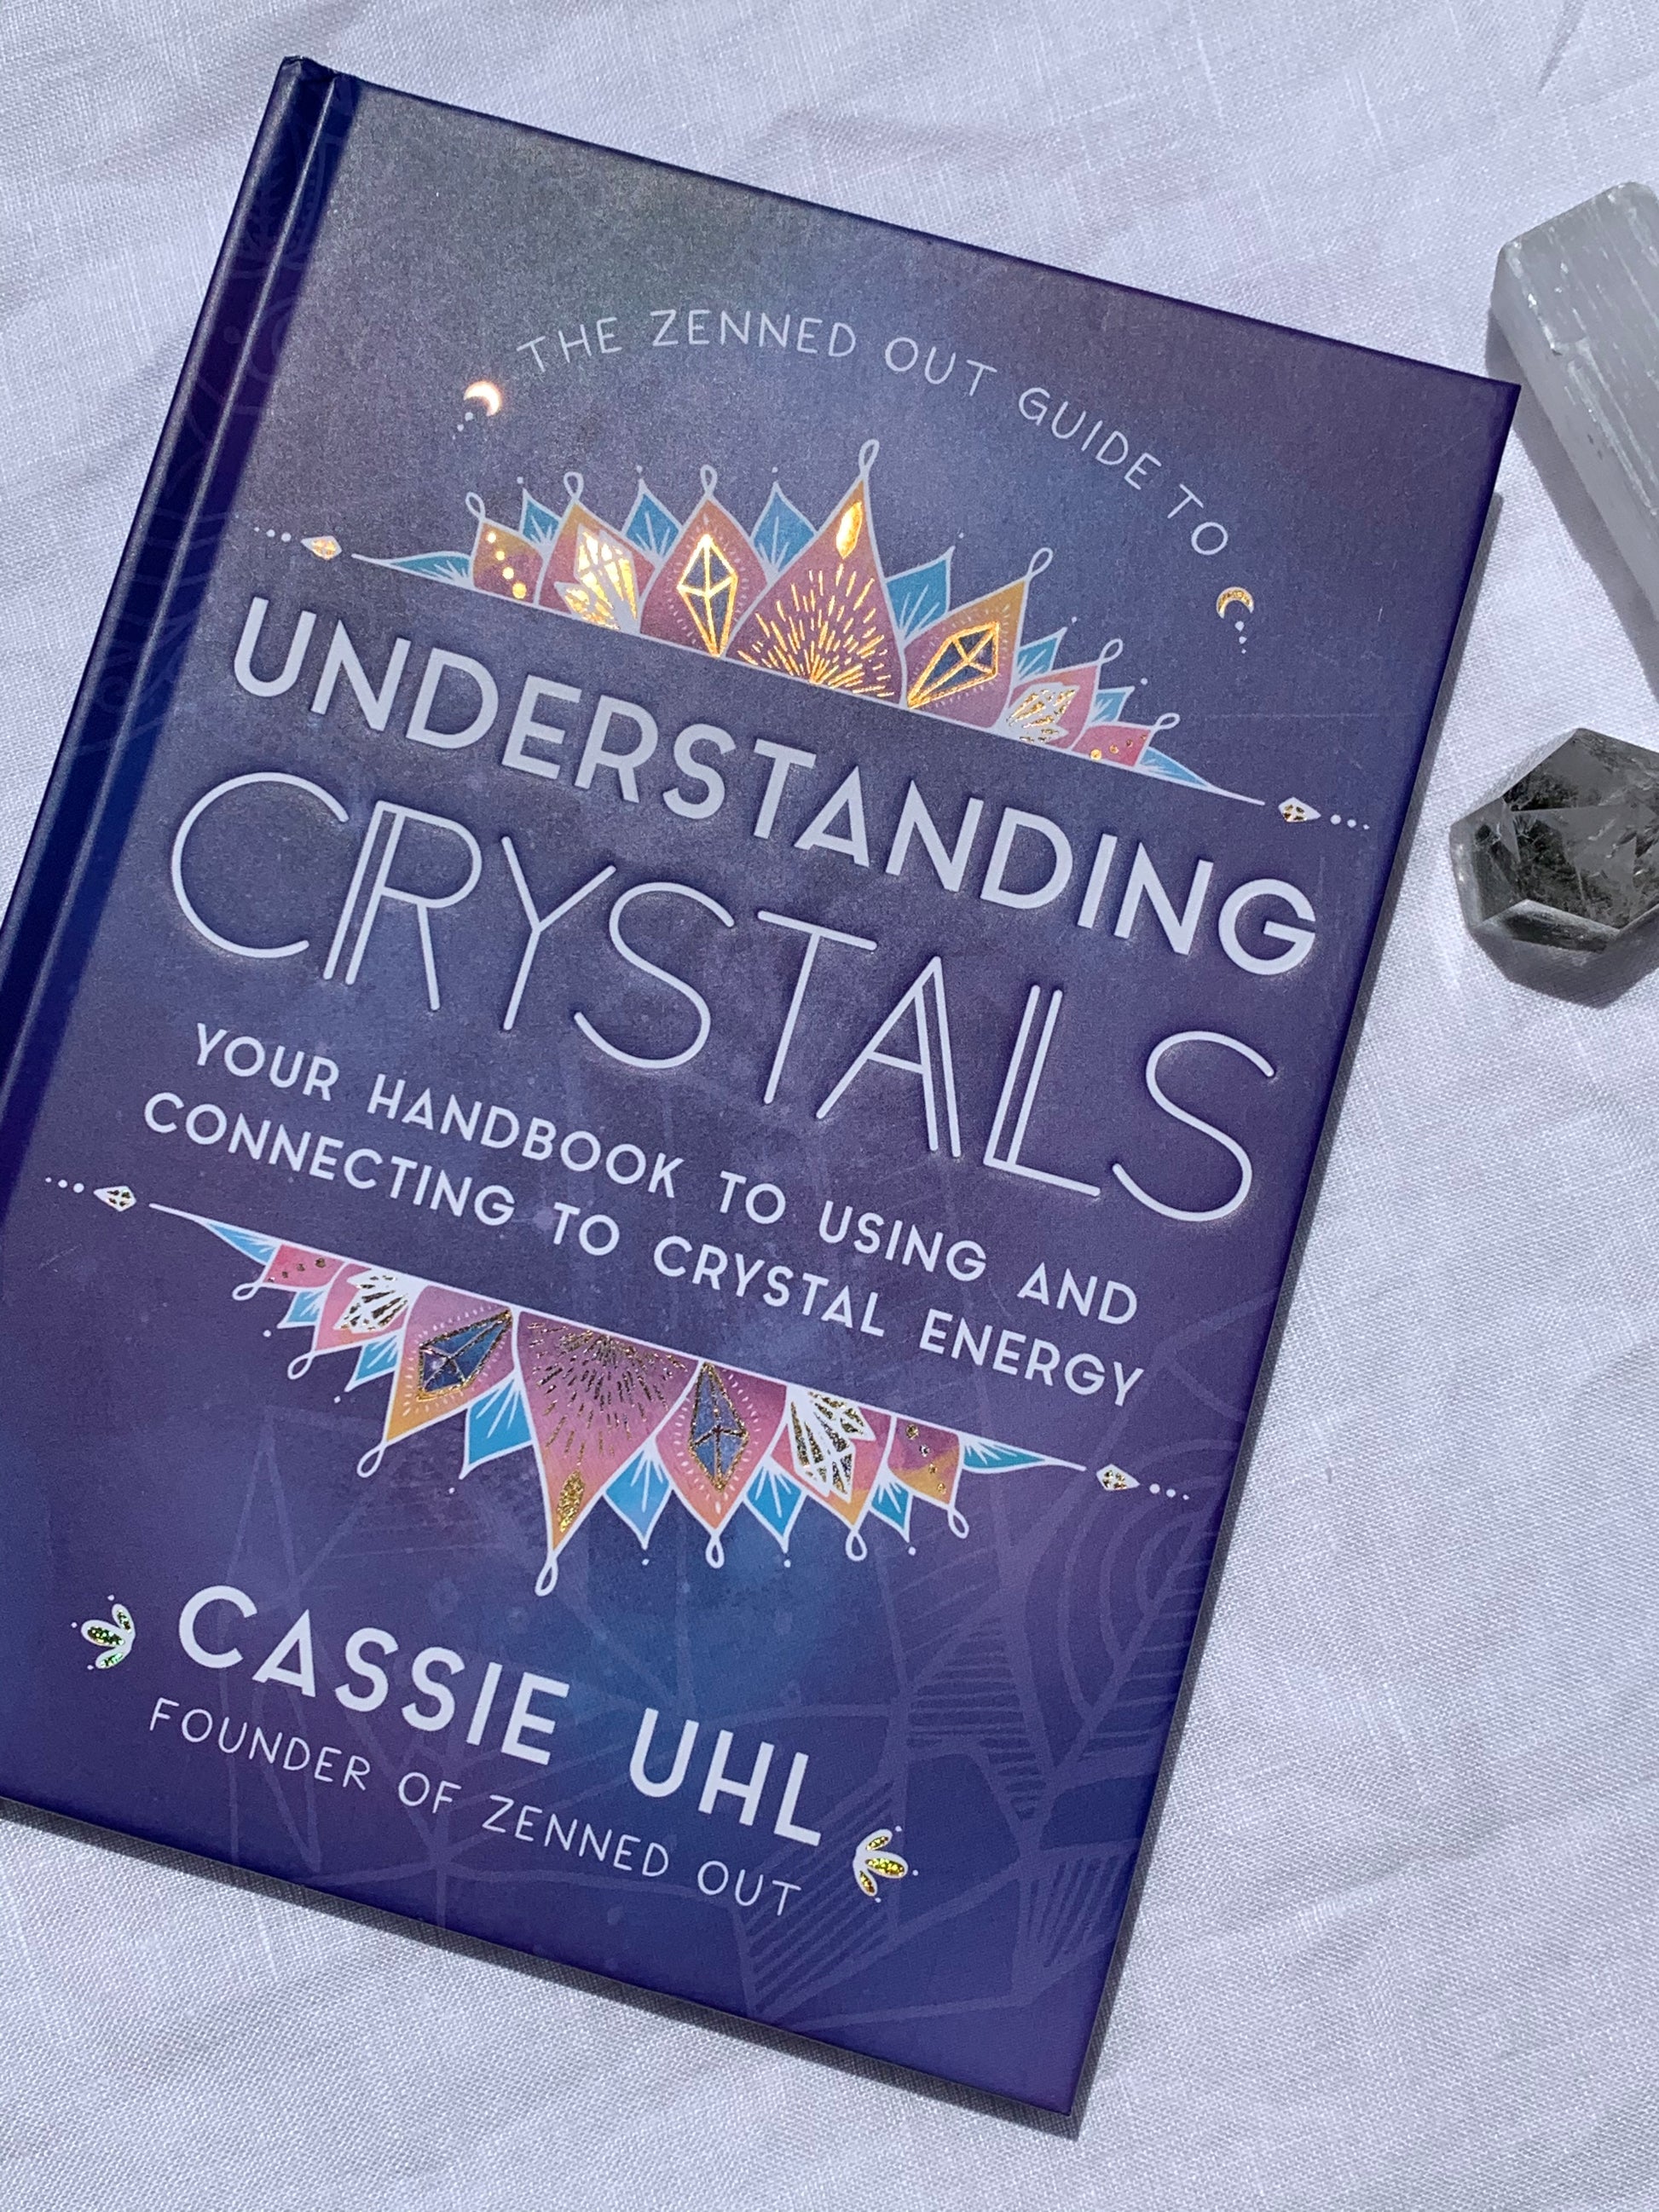 THE ZENNED OUT GUIDE TO UNDERSTAND CRYSTALS, CASSIE UHL